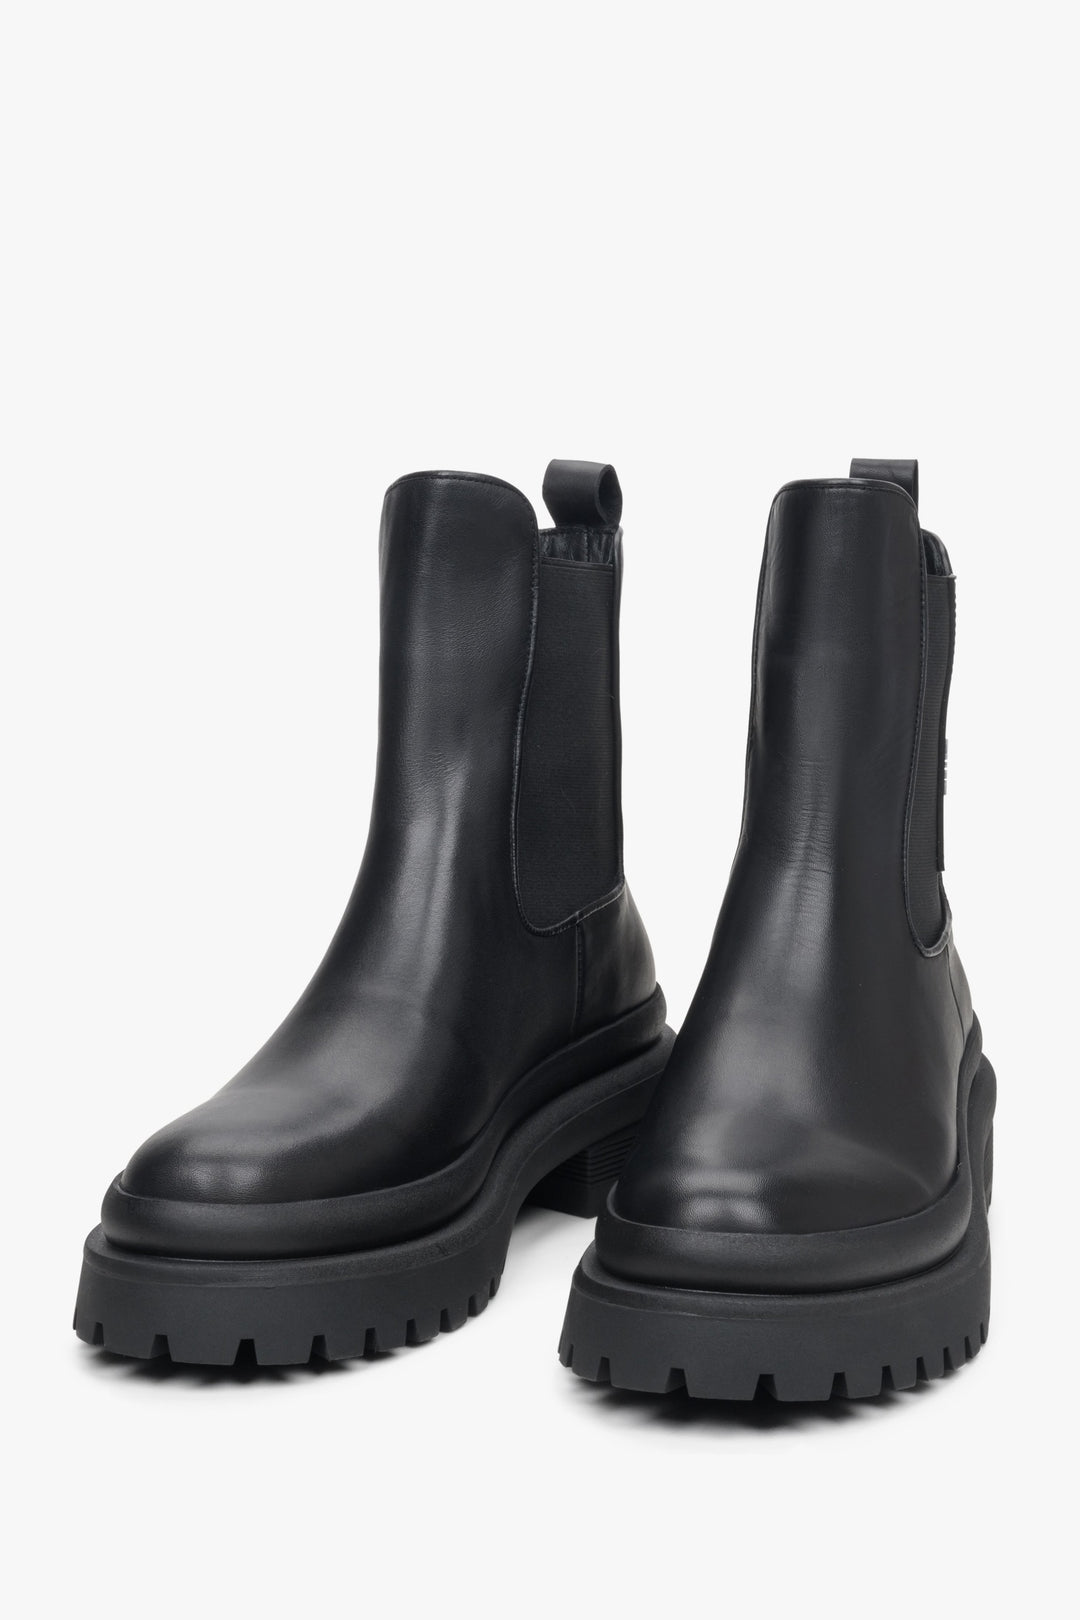 Comfortable women's black  ankle boots by Estro - close-up on the front of the model.